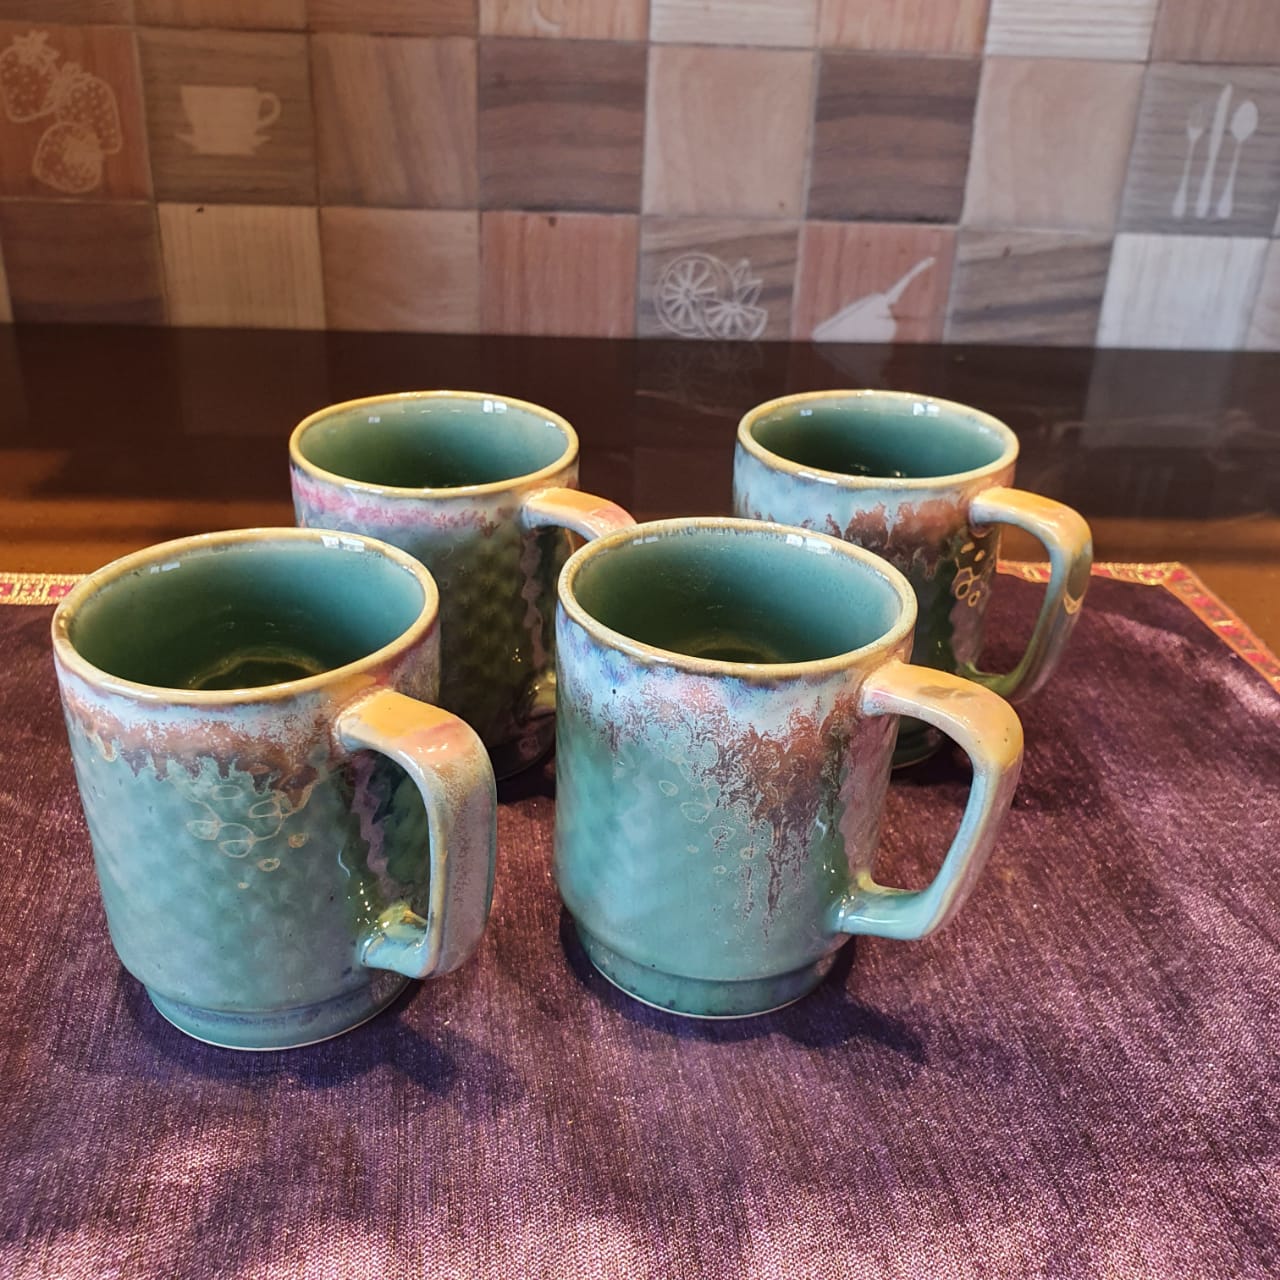 Turquoise Ceramic Mugs with Yellow and Pink Tints, Set of 4, Coffee and Tea Mugs, Soup Mugs 170 Ml Each, Set of 4 Tea Cups